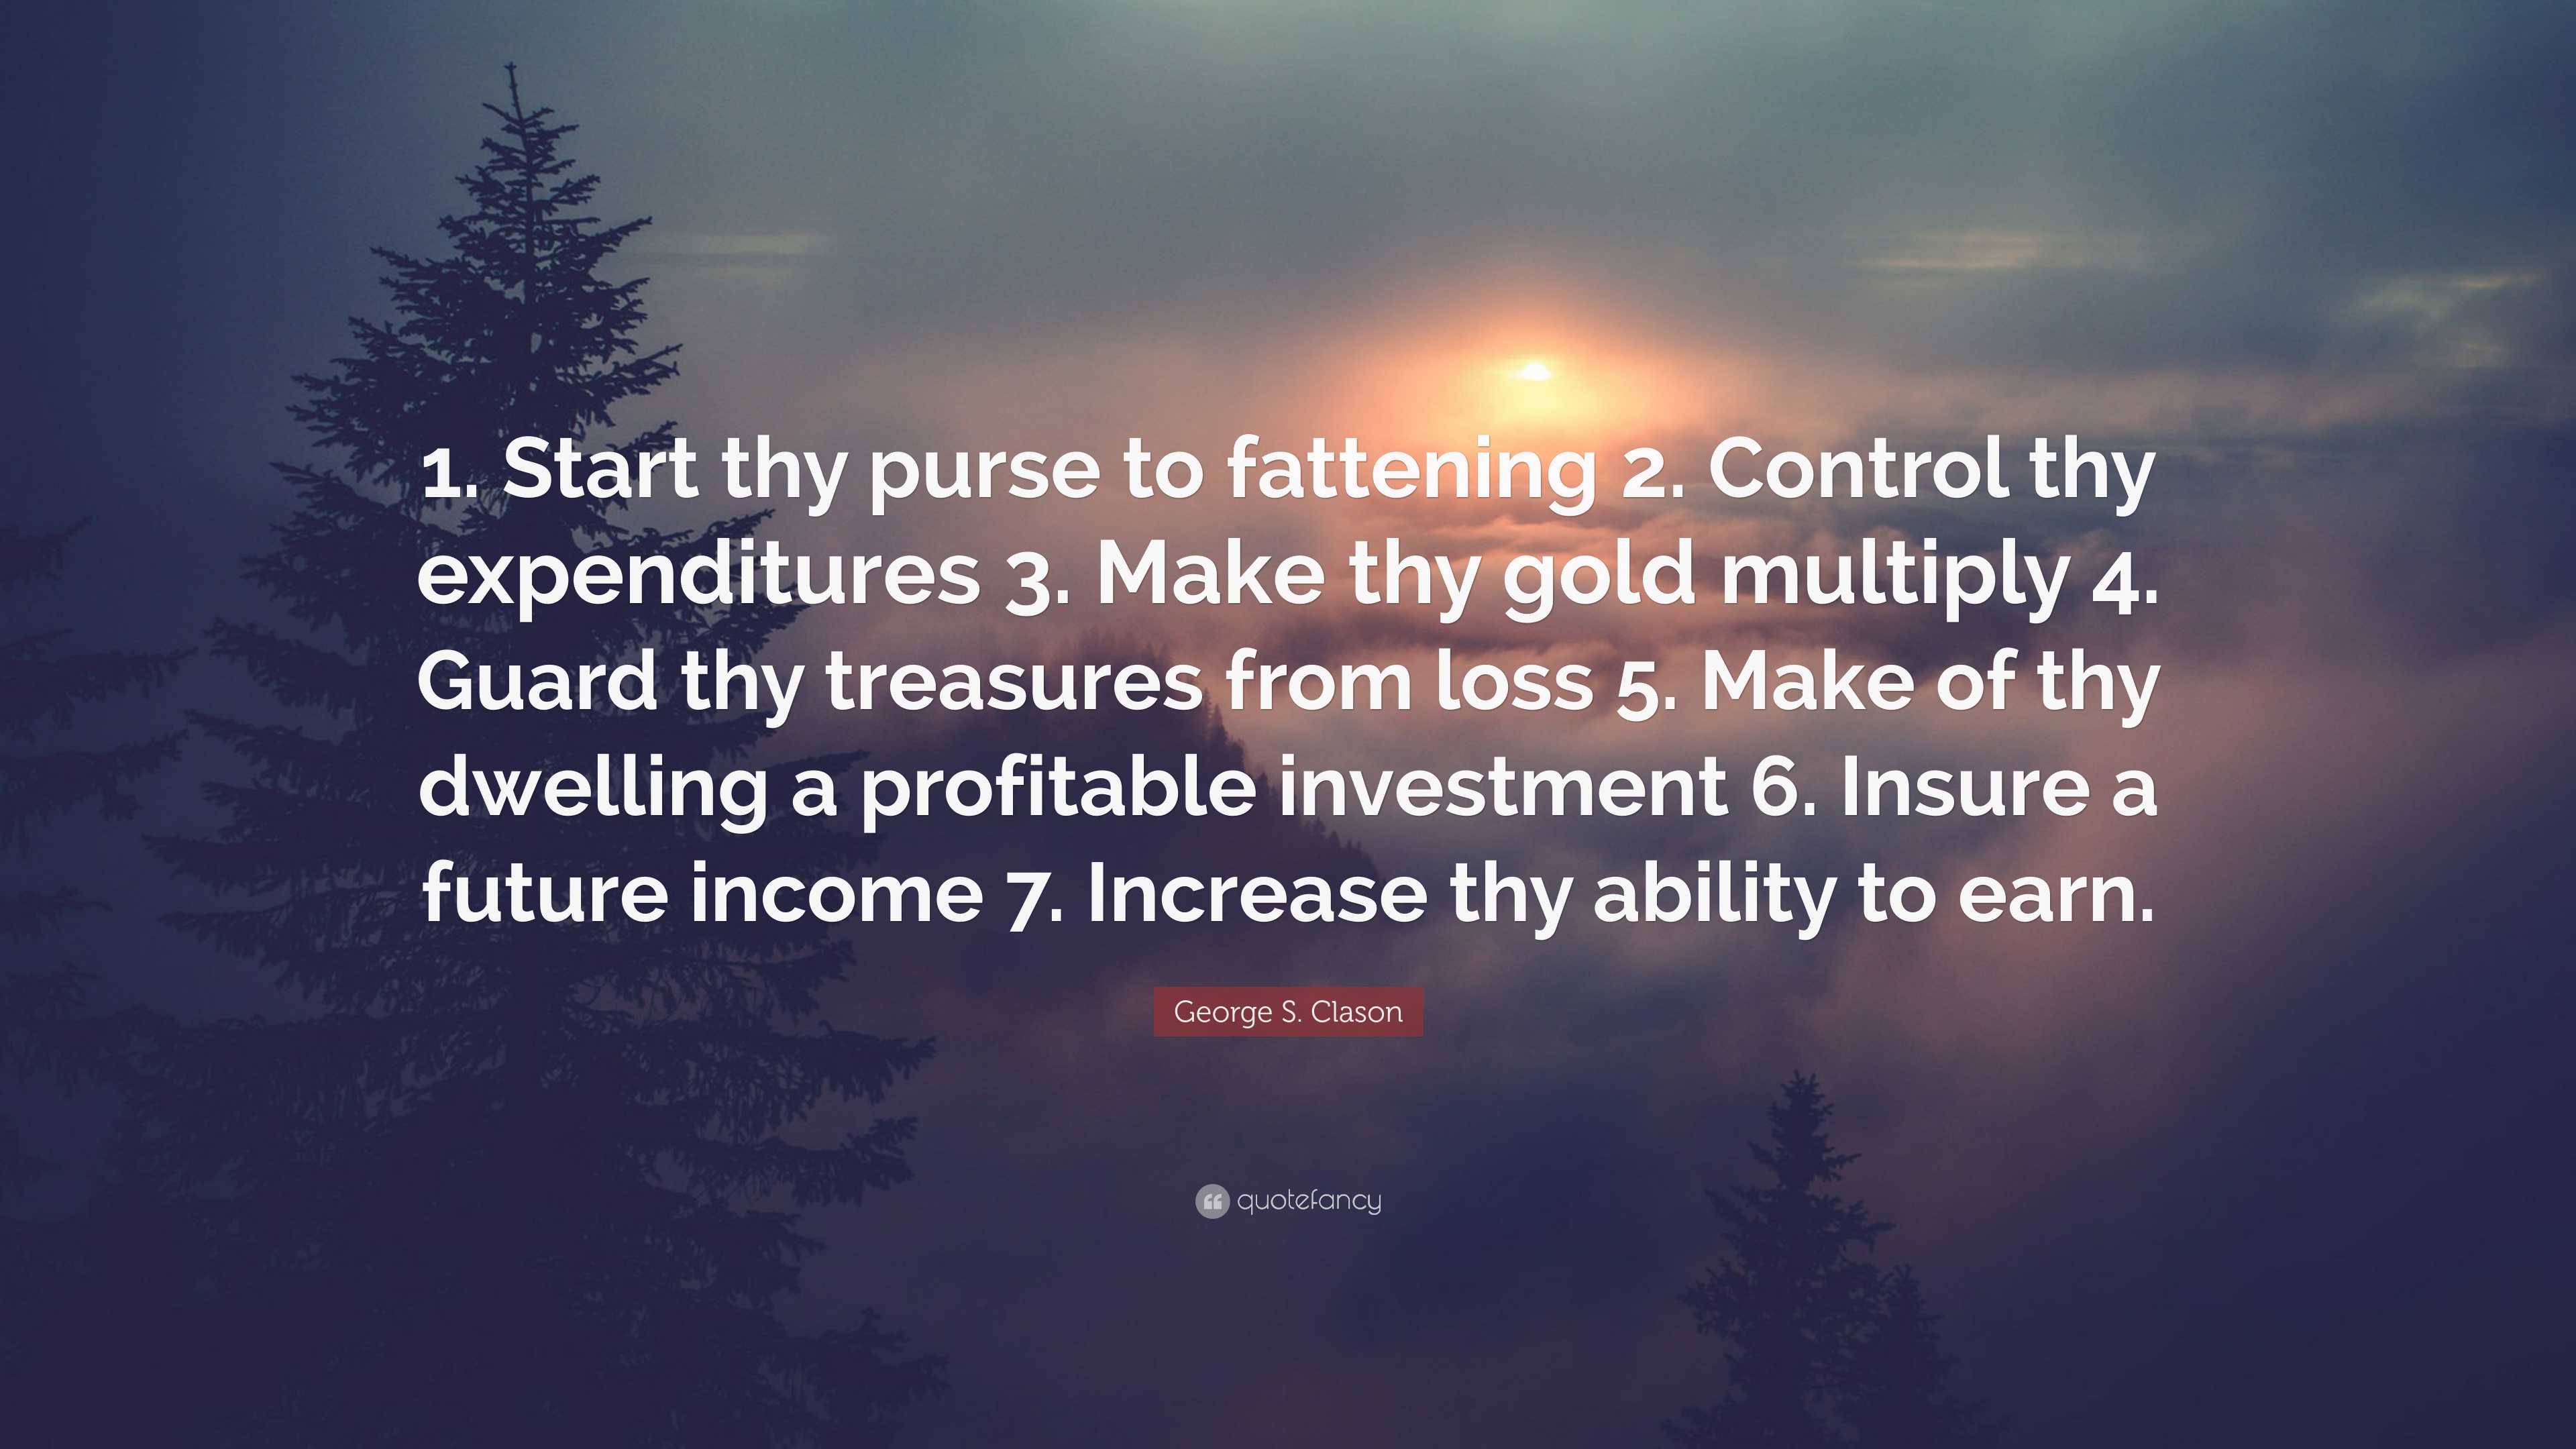 Set Thy Purse To Fattening -Blog 192 - Informed Decisions